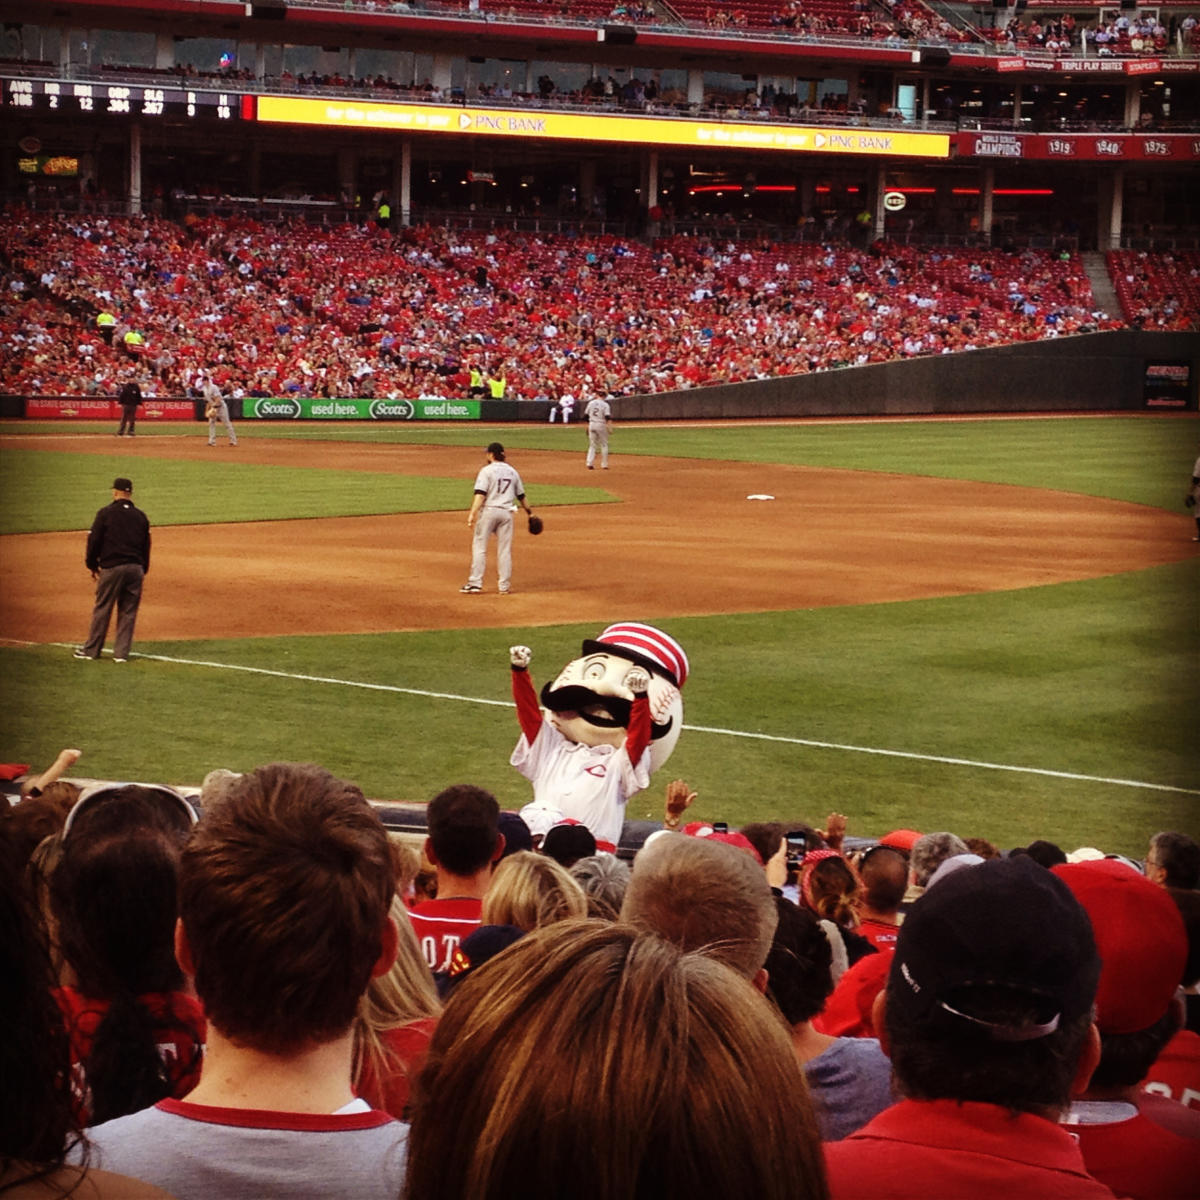 What to Know Before You Go to a Cincinnati Reds Game